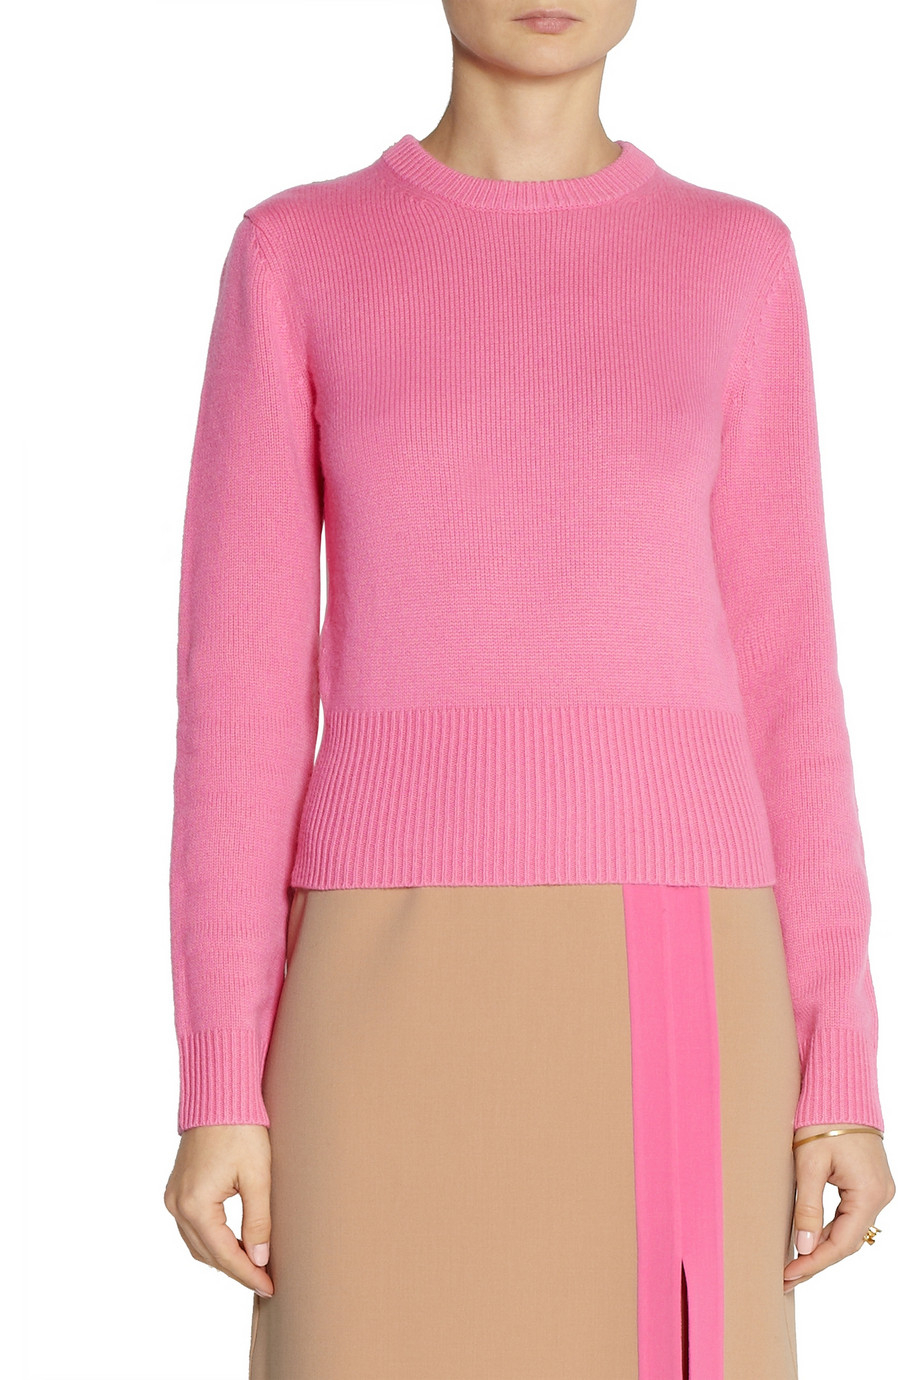 Michael Kors Cashmere Sweater in Pink - Lyst